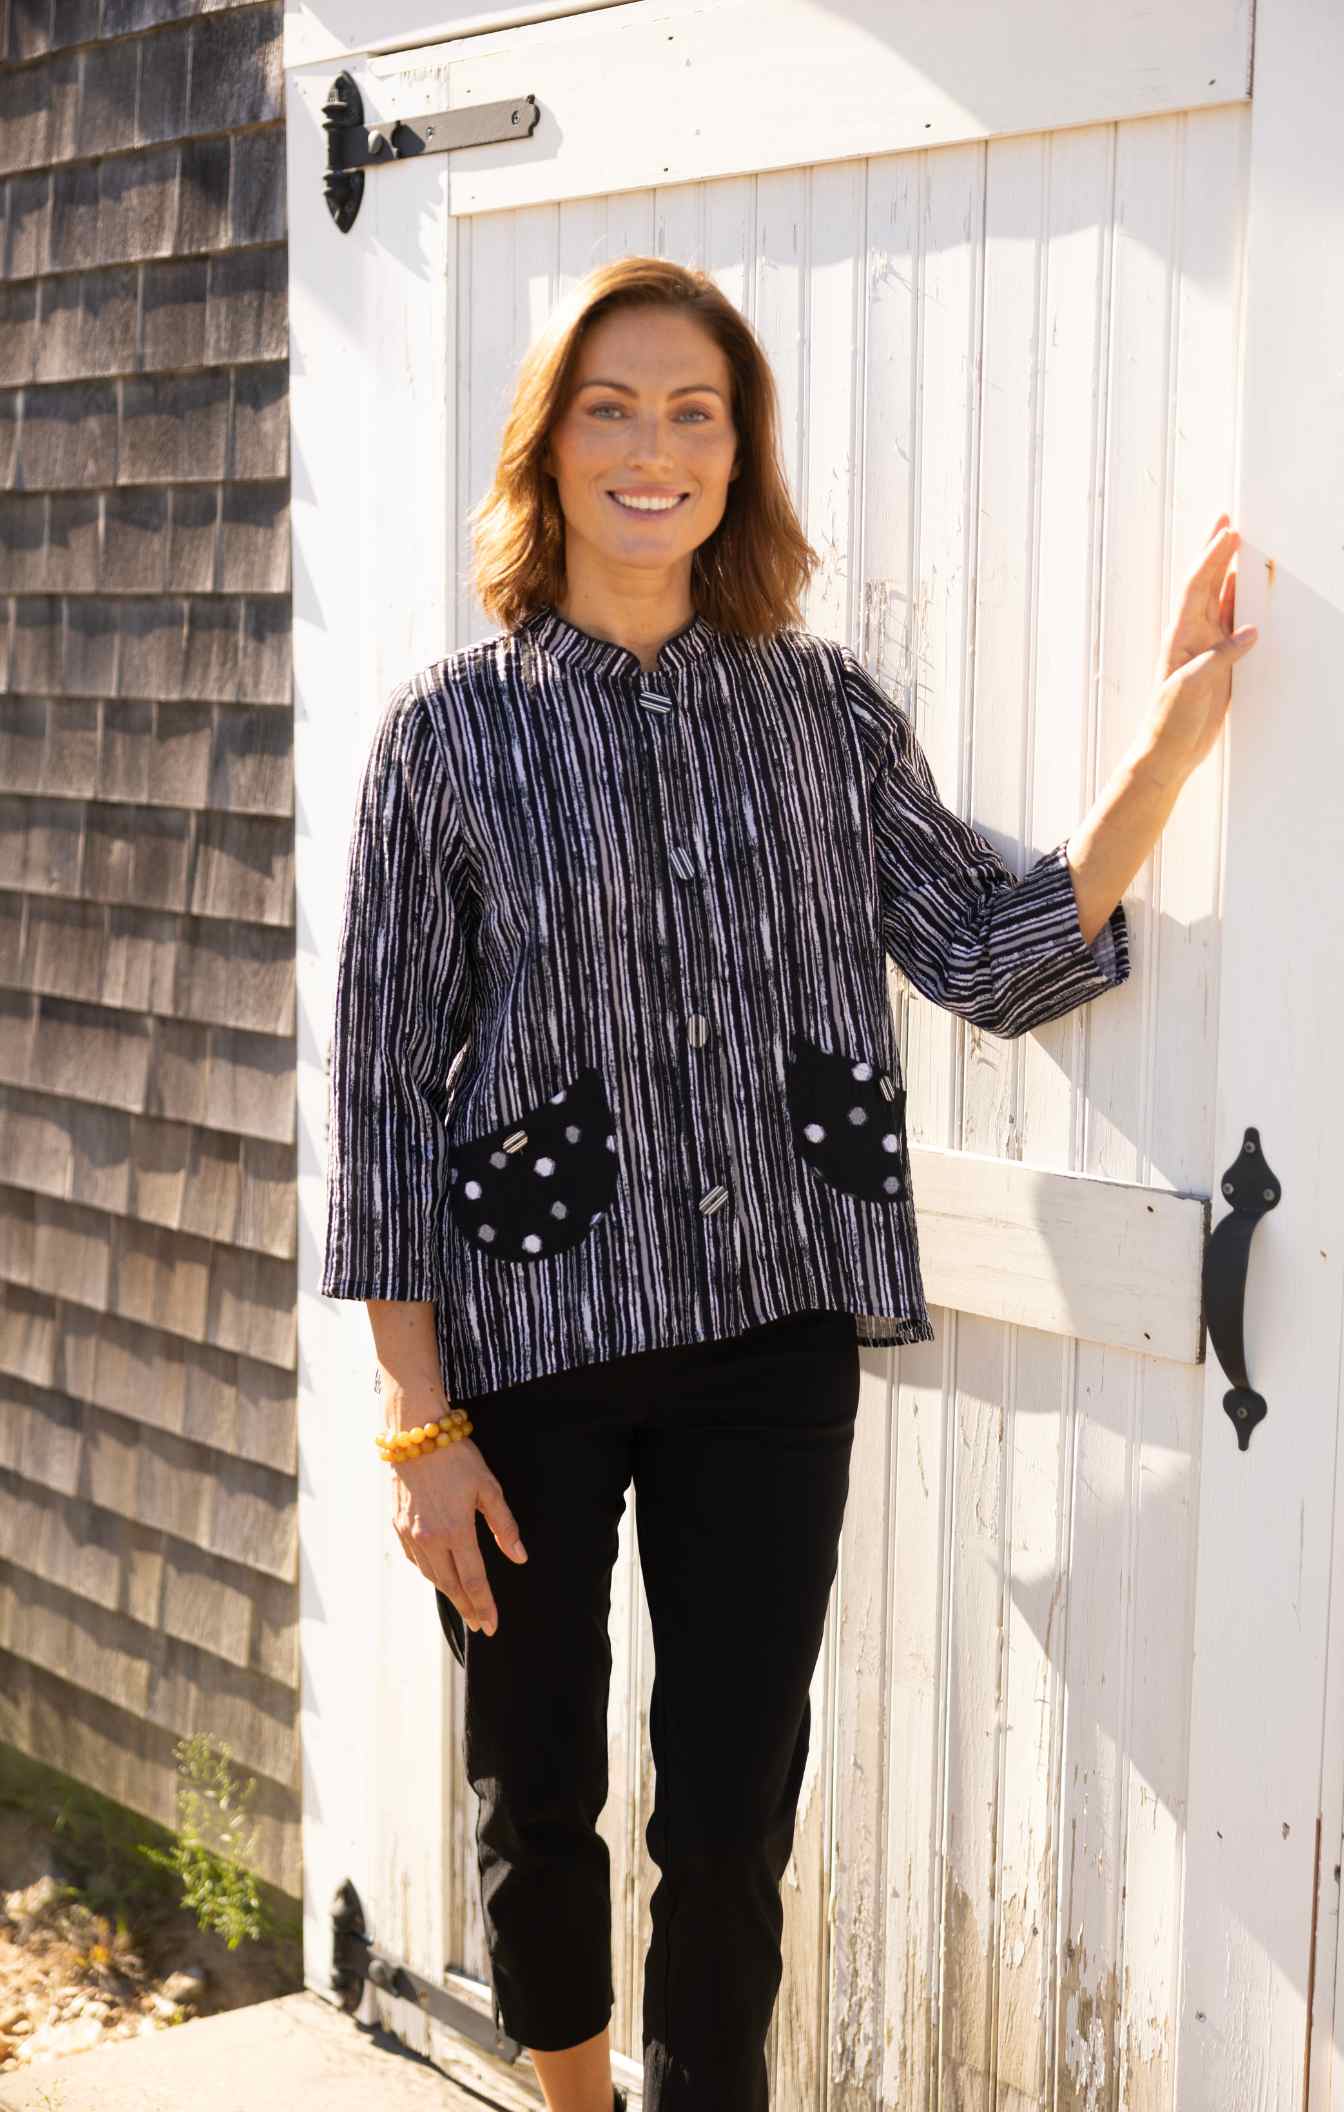 <p>Habitat designs for real women leading real lives. We prioritize comfort, fit and detail to create unique, modern looks that complement your body and sense of self.</p> <p>Victoria Susan Wearable Art is a clothing boutique for women in Downtown Camden SC.&nbsp;</p>